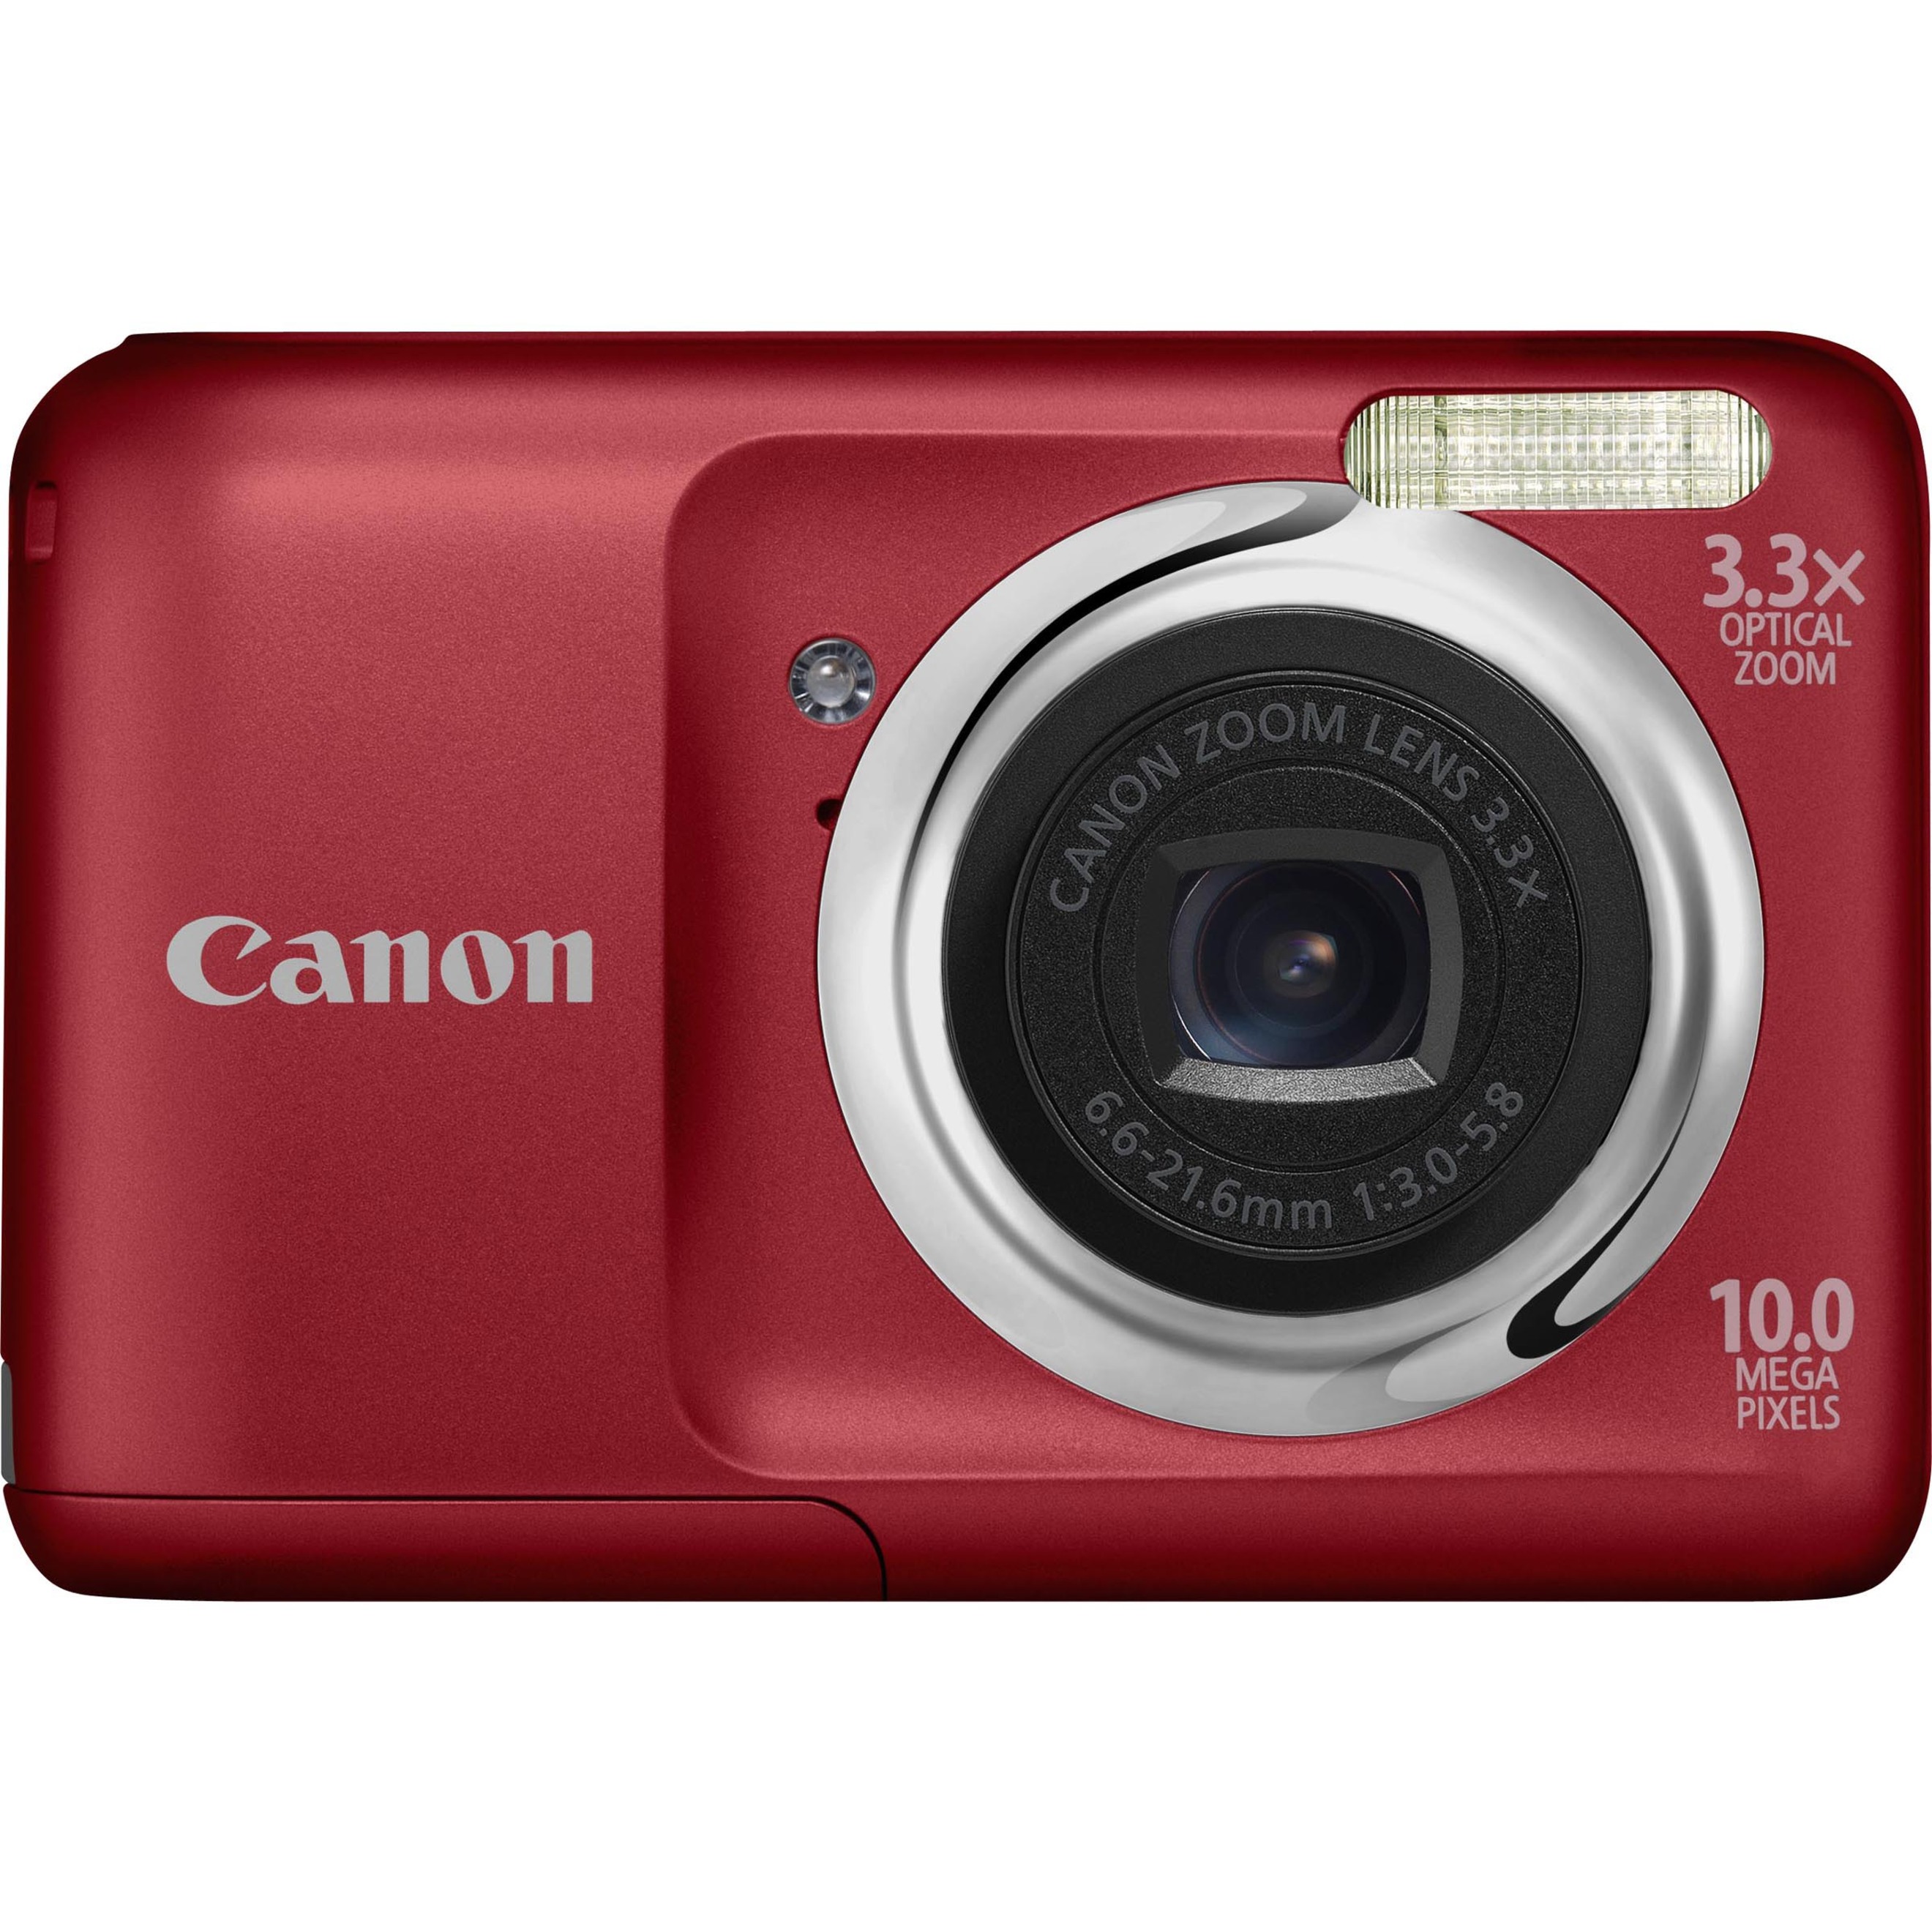 Canon PowerShot A800 10 Megapixel Compact Camera, Red - image 1 of 4